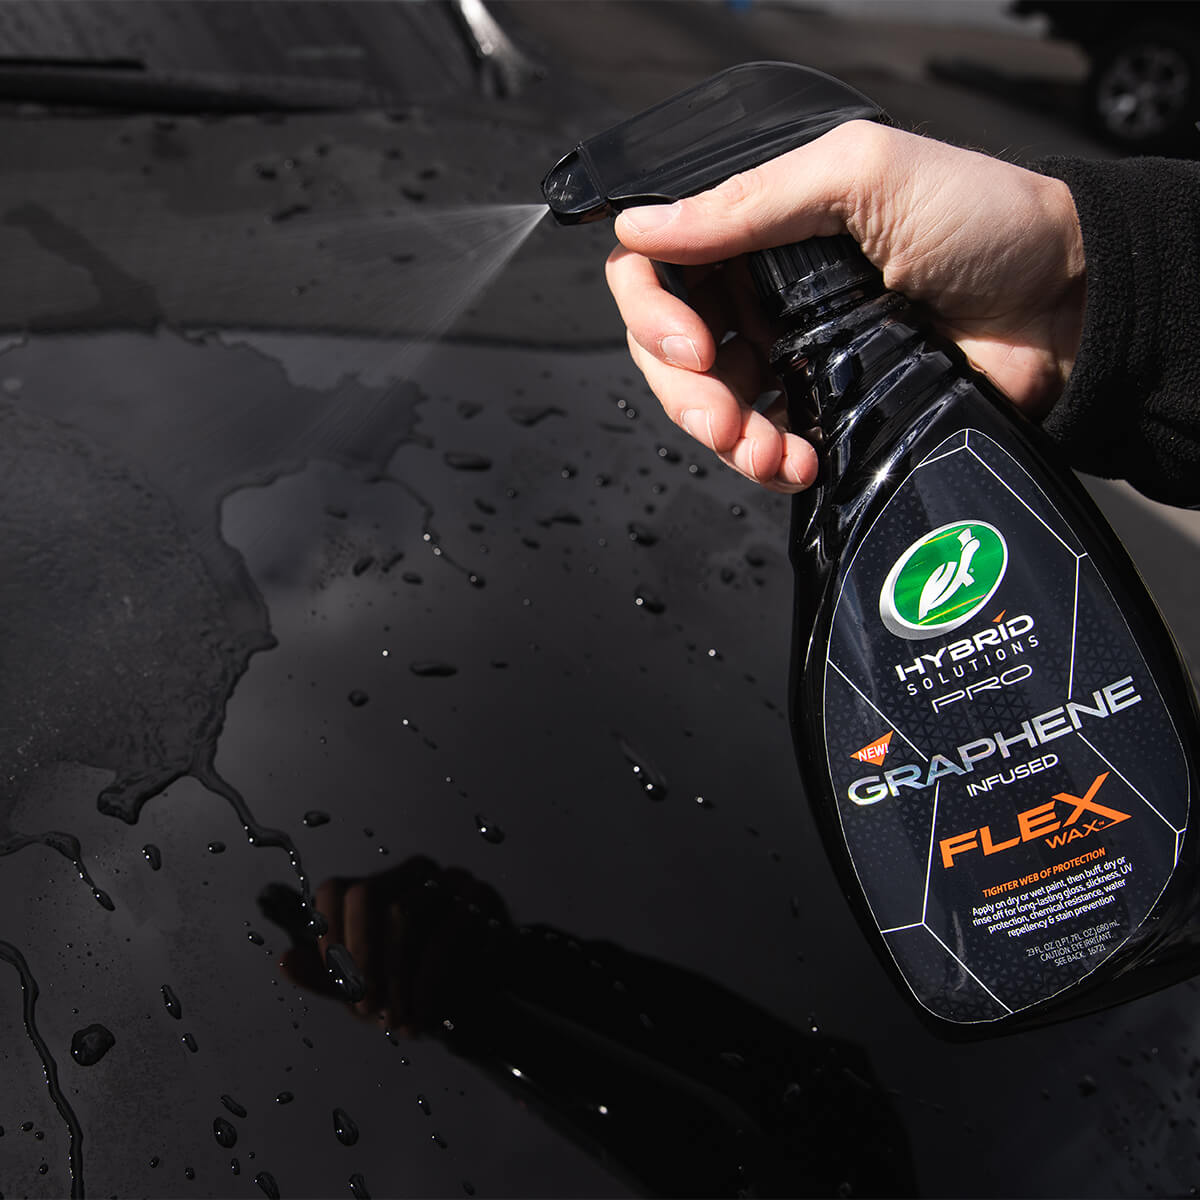 Ceramic Coating vs. Wax: Which Is Better? | Turtle Wax